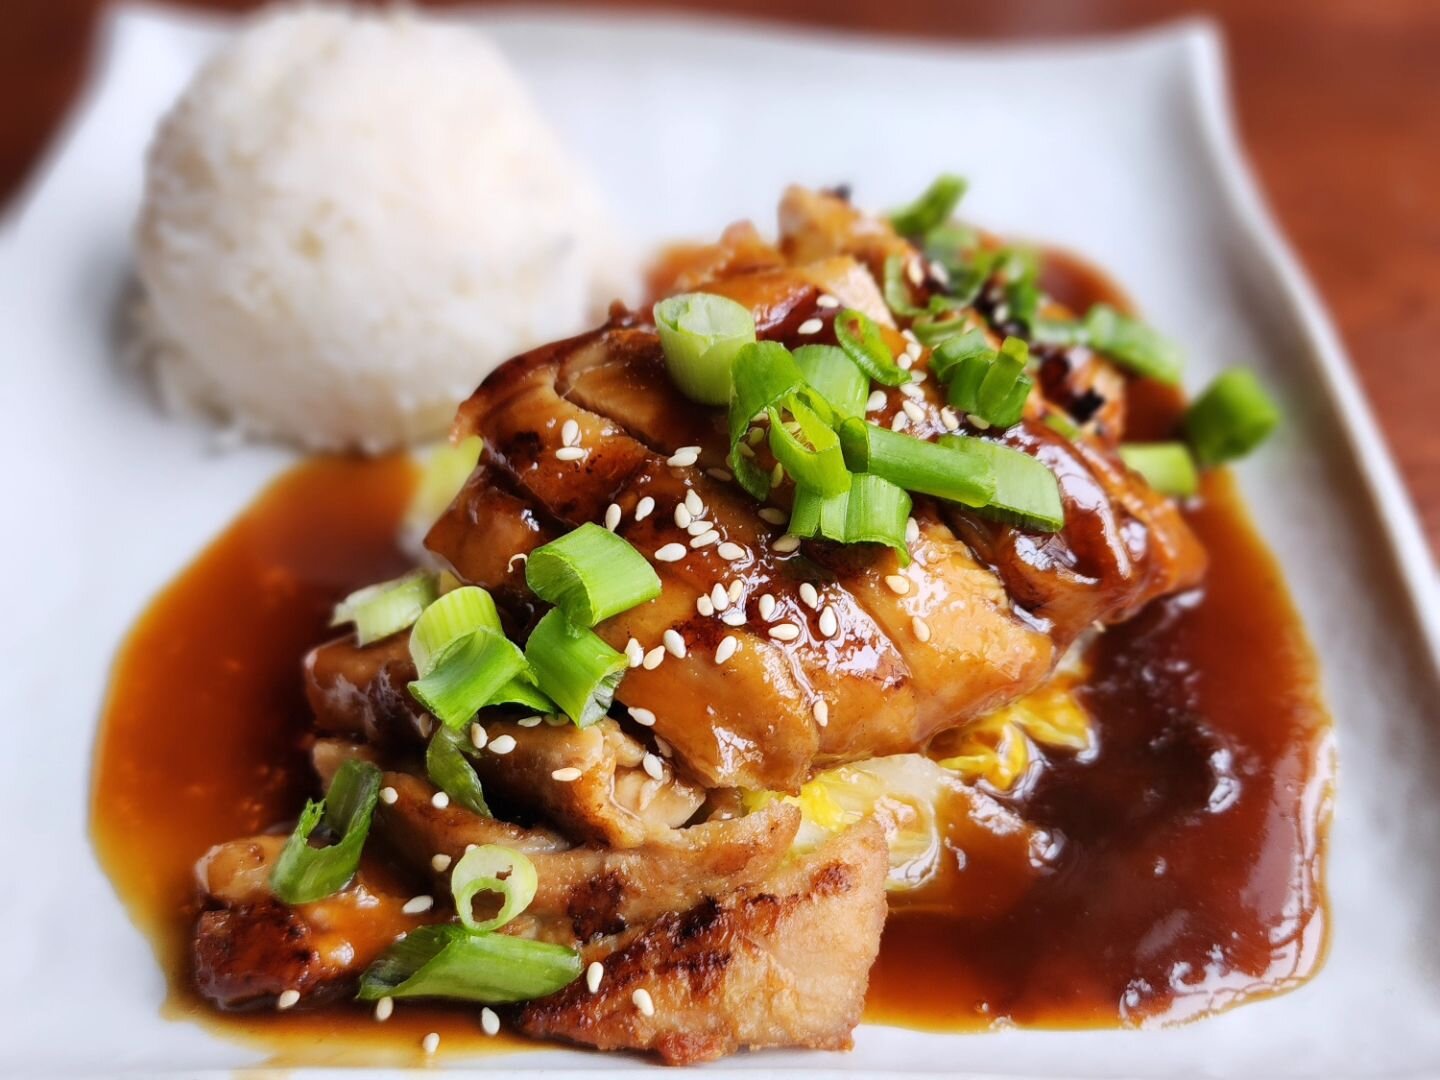 Next on the 🌼Spring Menu🌼: Chicken Teriyaki!

Sawasdee ka 🙏🏻!

We know what you're thinking: this ain't Thai Food! And that's perfectly ok because, like most international cuisine, Thailand draws a lot of influence from other countries 🫱🏻&zwj;?